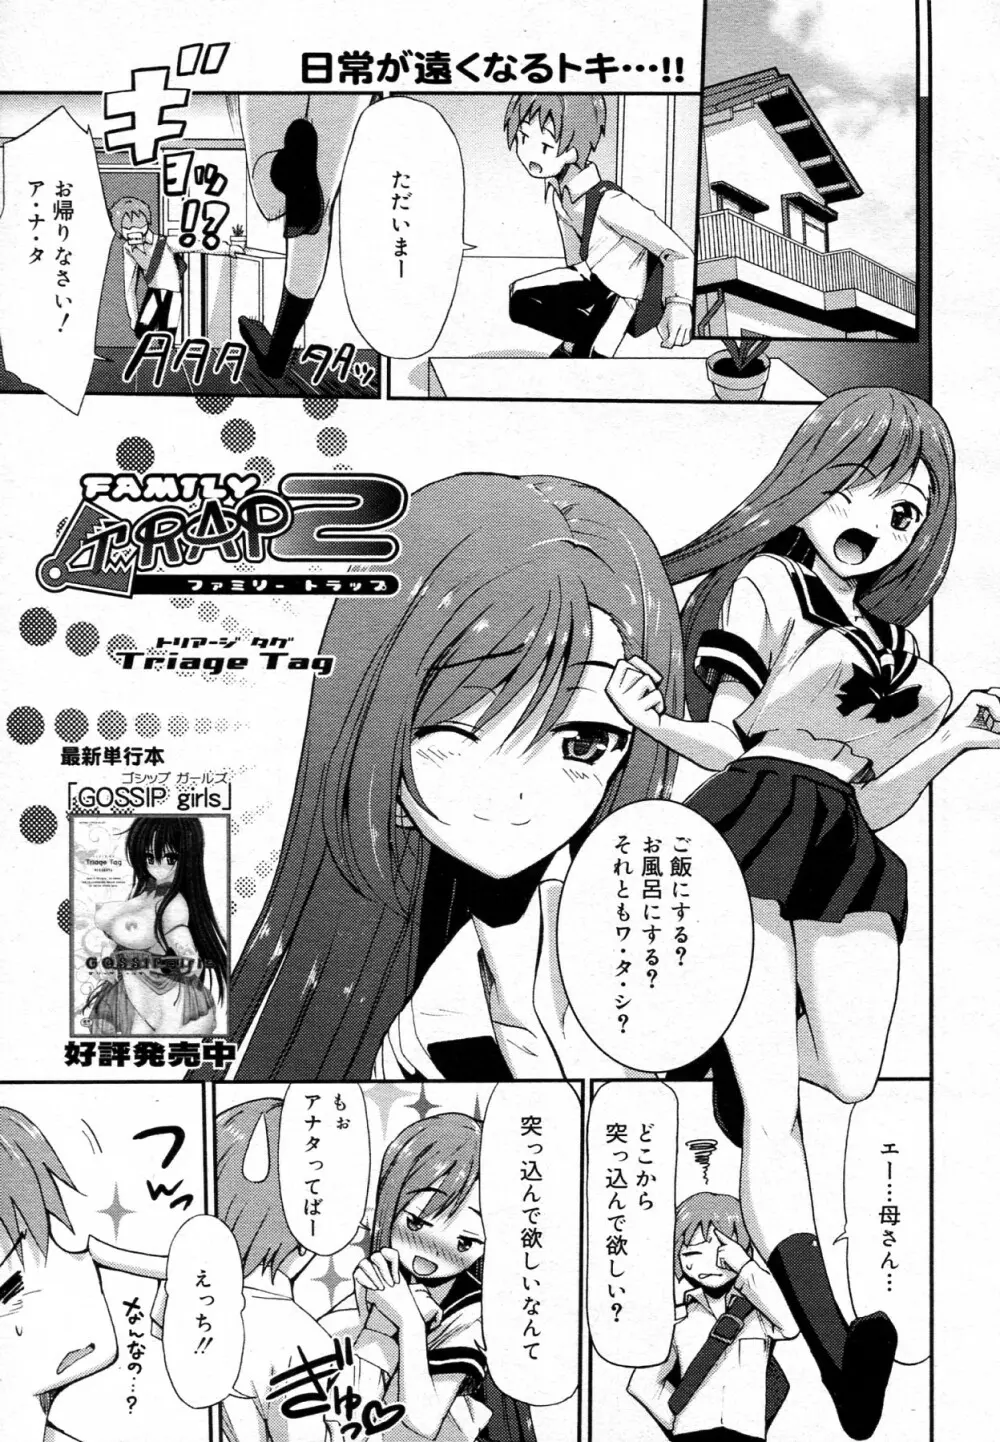 FAMILY TRAP 第01-02話 Page.19